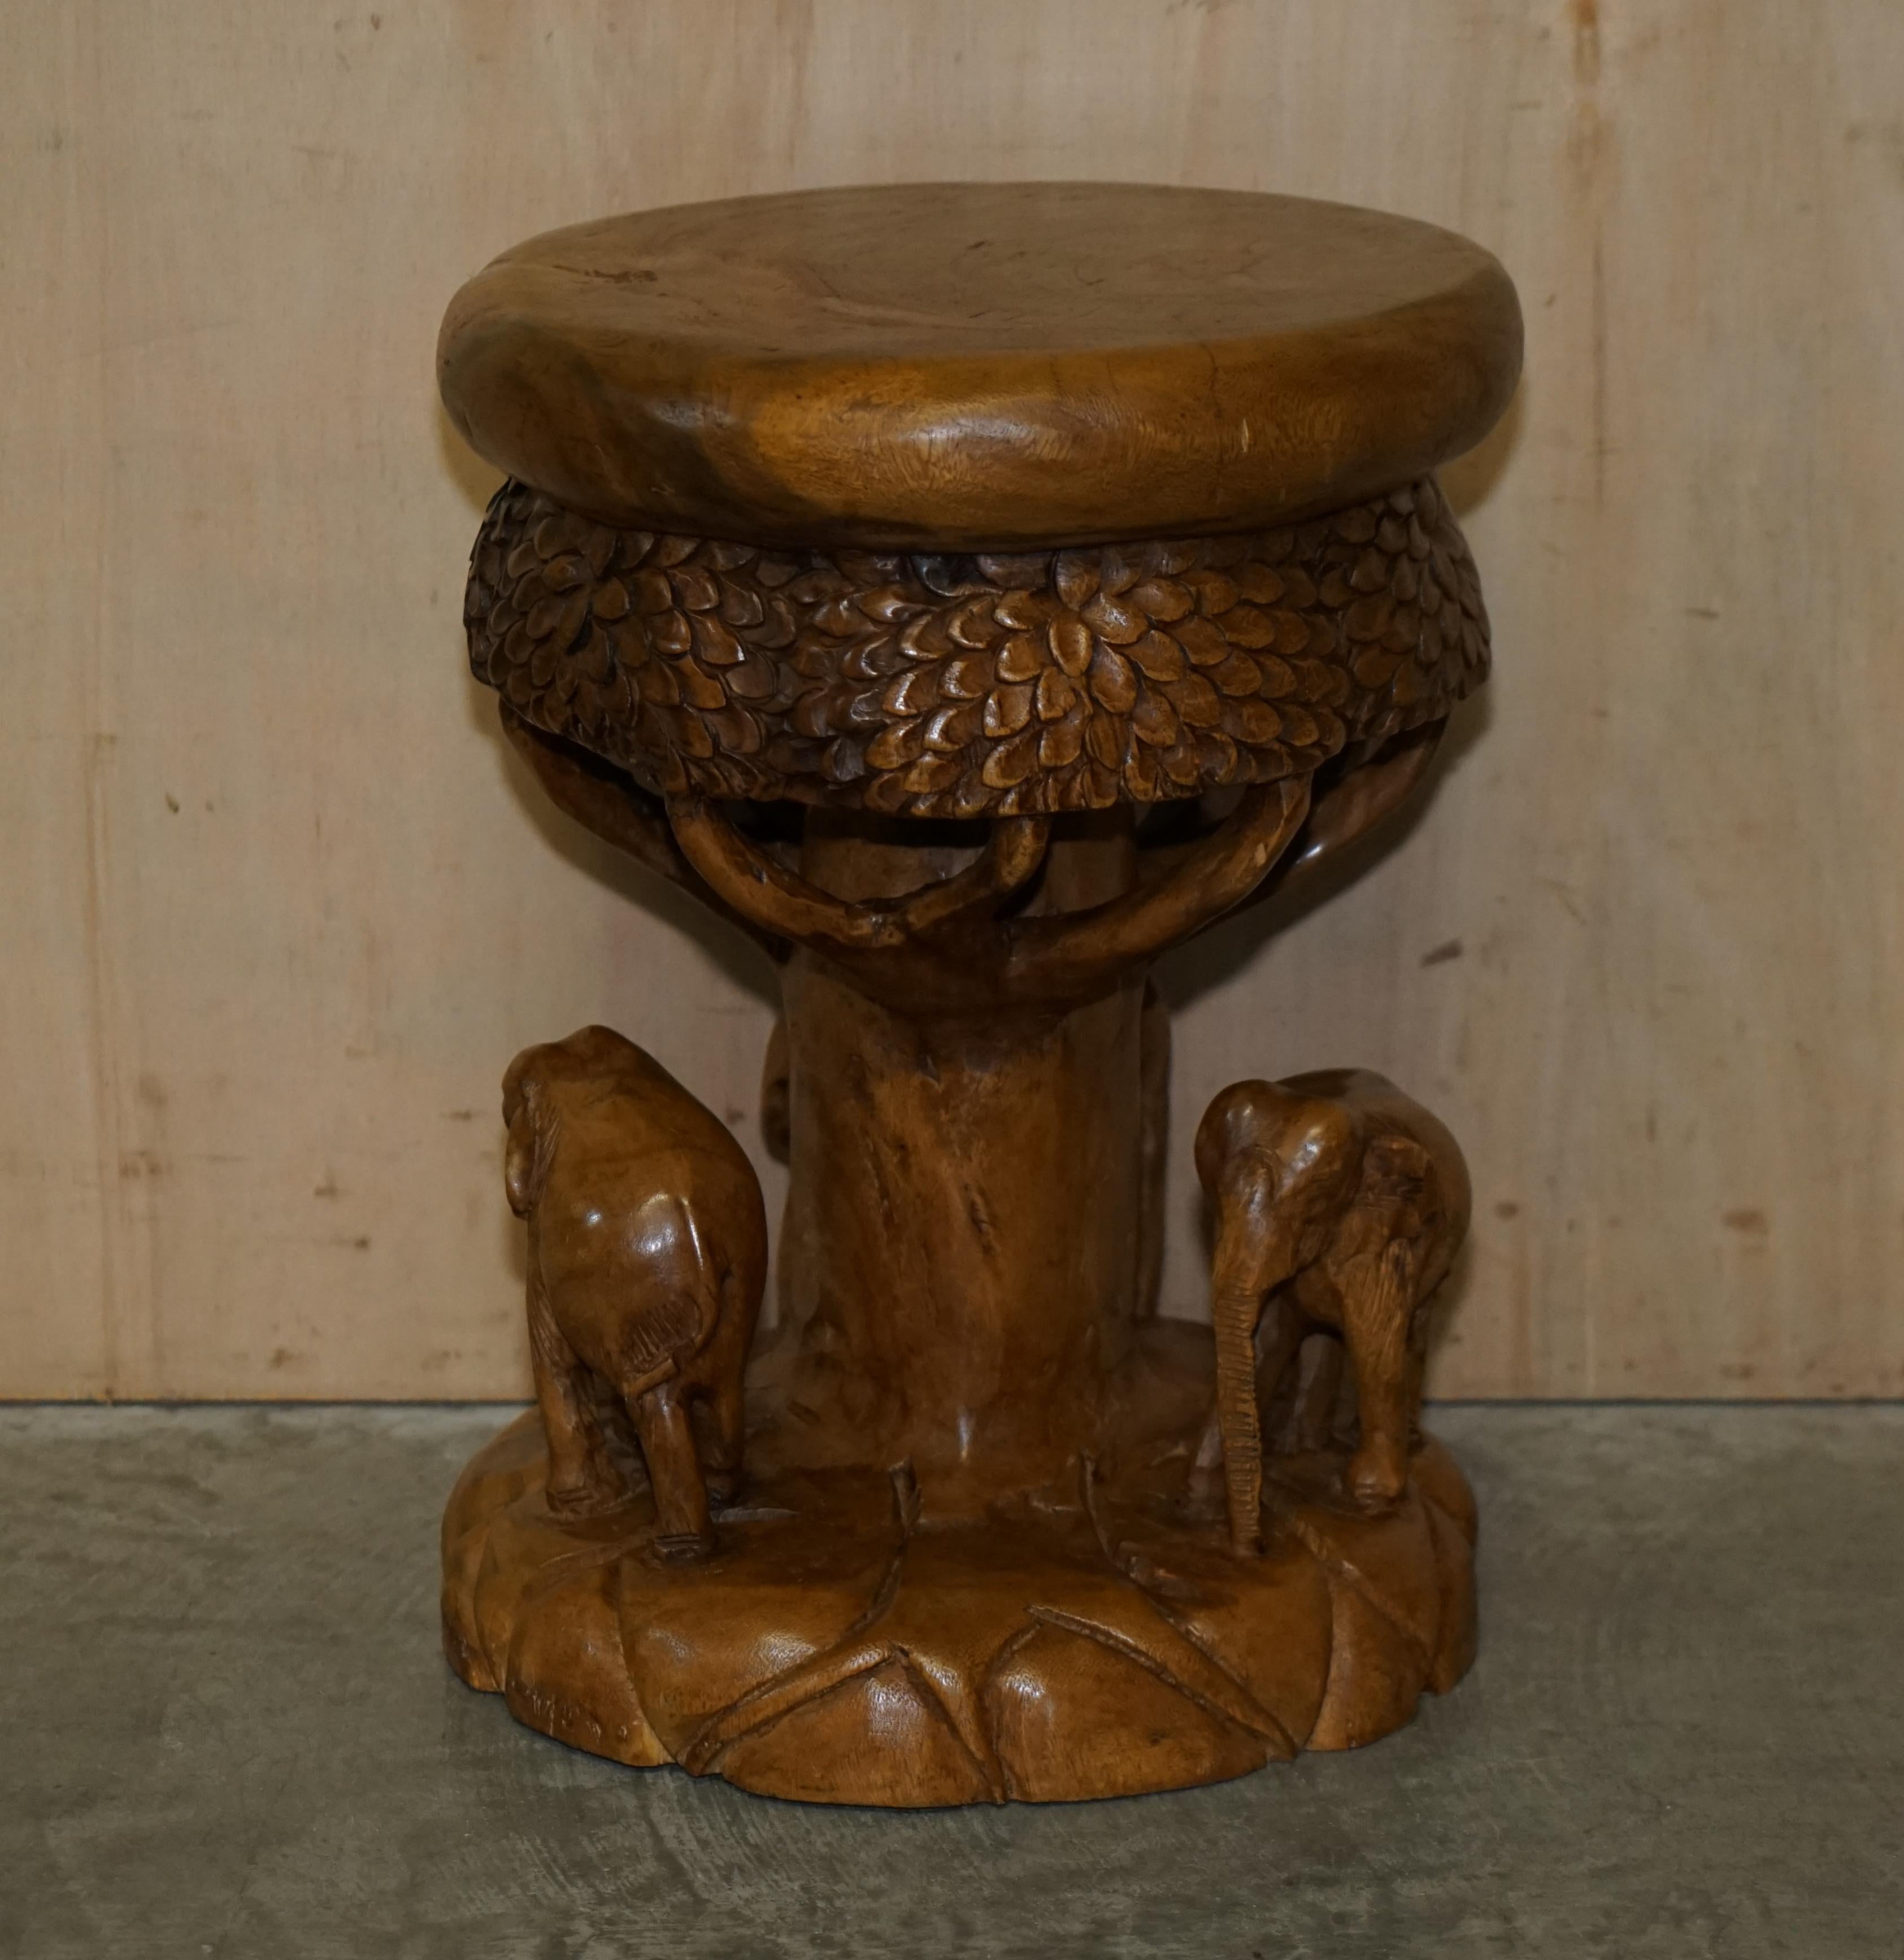 We are delighted to offer for sale this stunning hand carved Elephant stool with ornate detailing all over

A very good-looking and decorative stool, the Elephants look happy and playful from any side, they are nicely carved 

We have cleaned